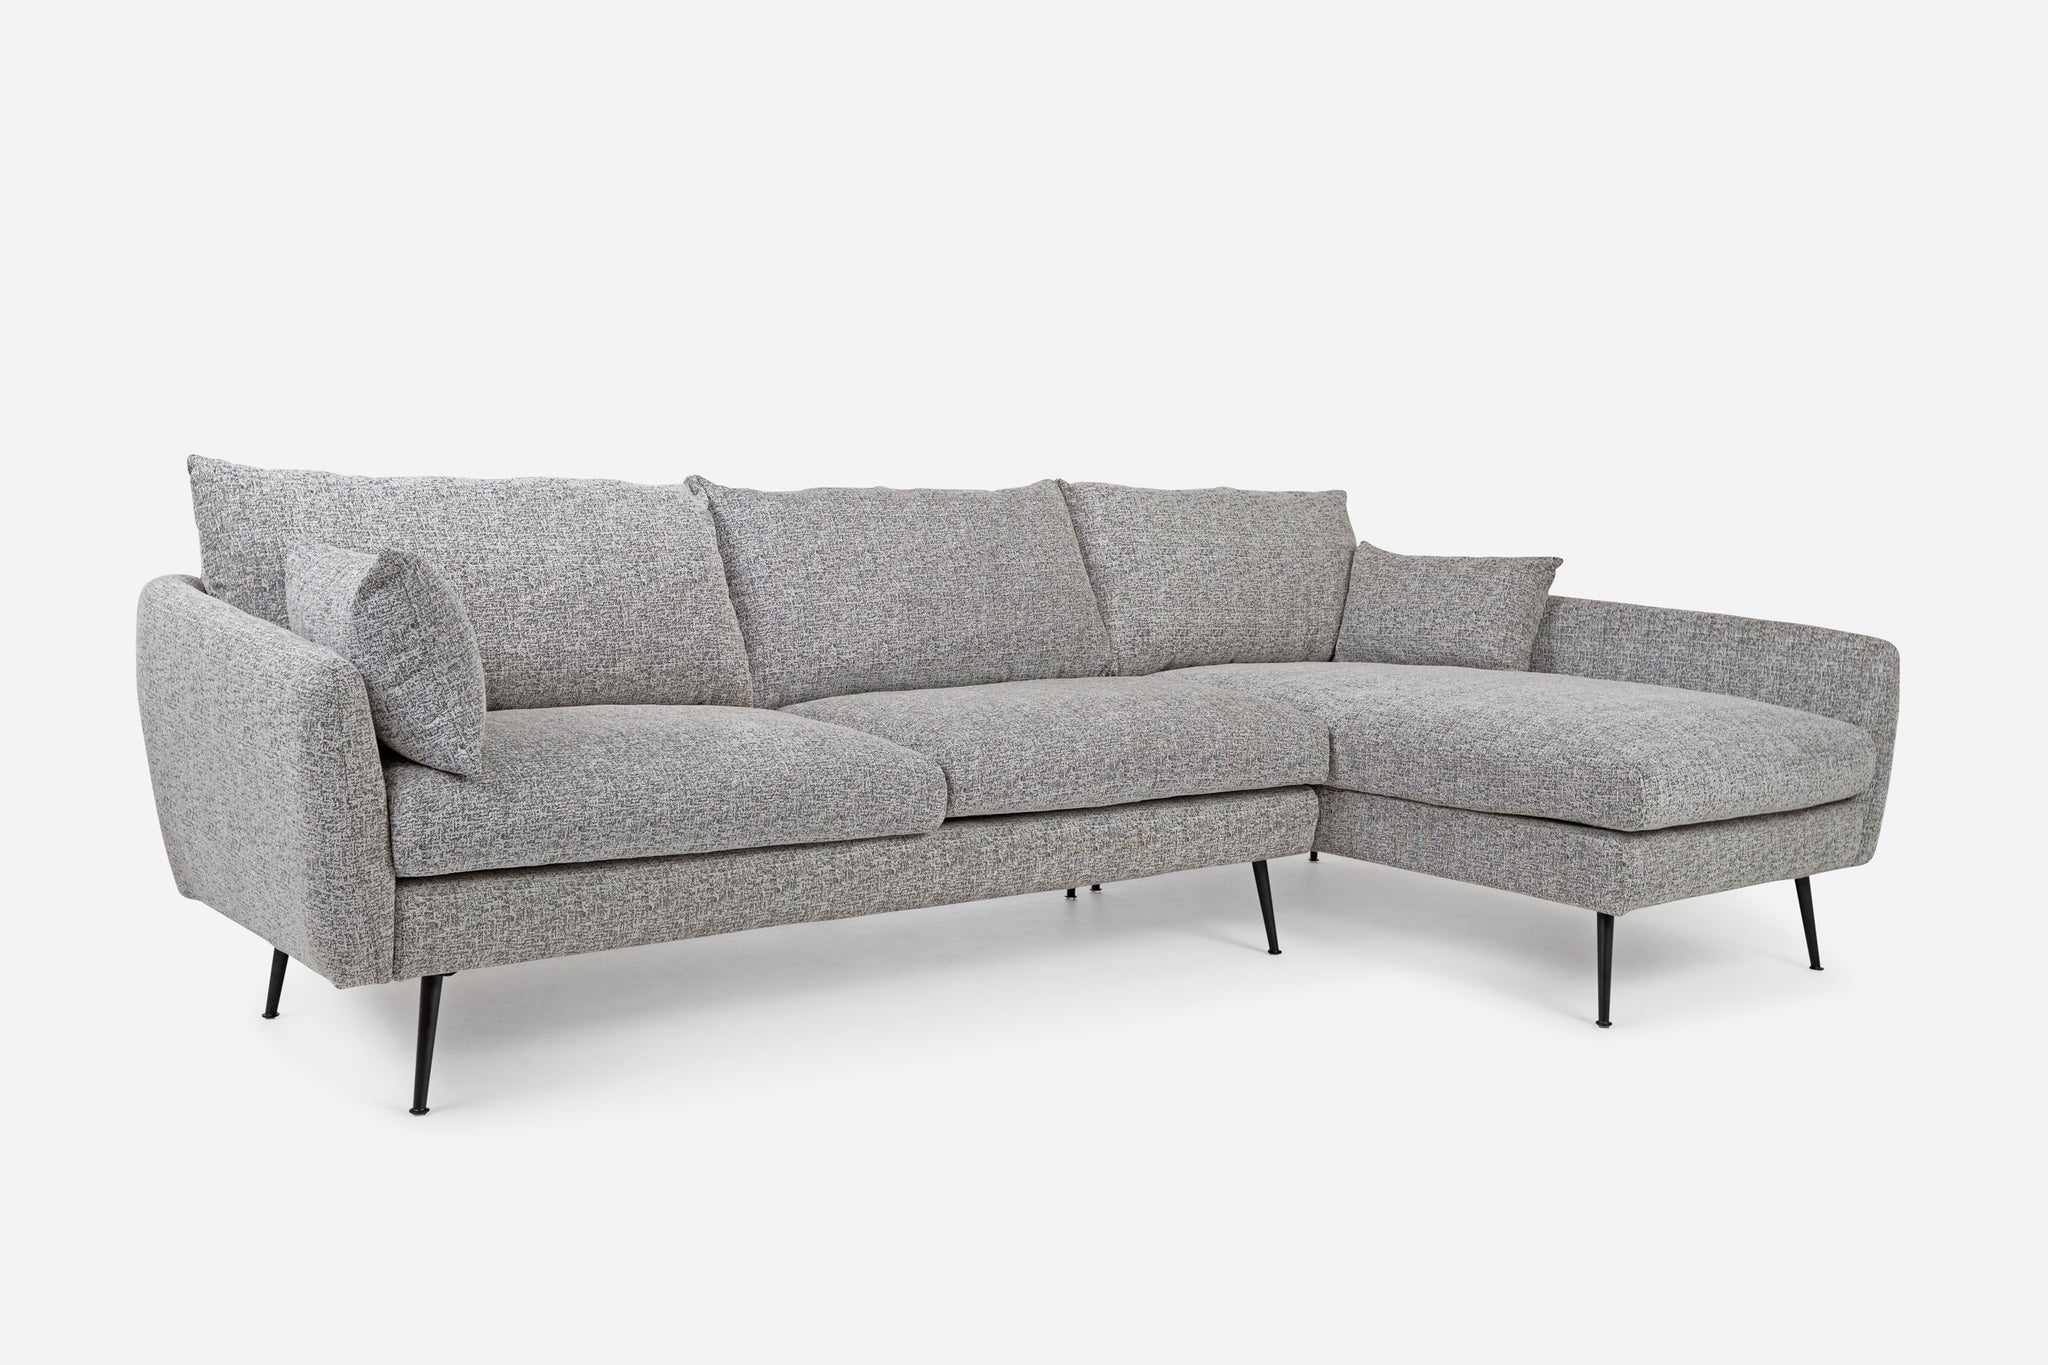 park sectional sofa shown in grey fabric right facing with black legs